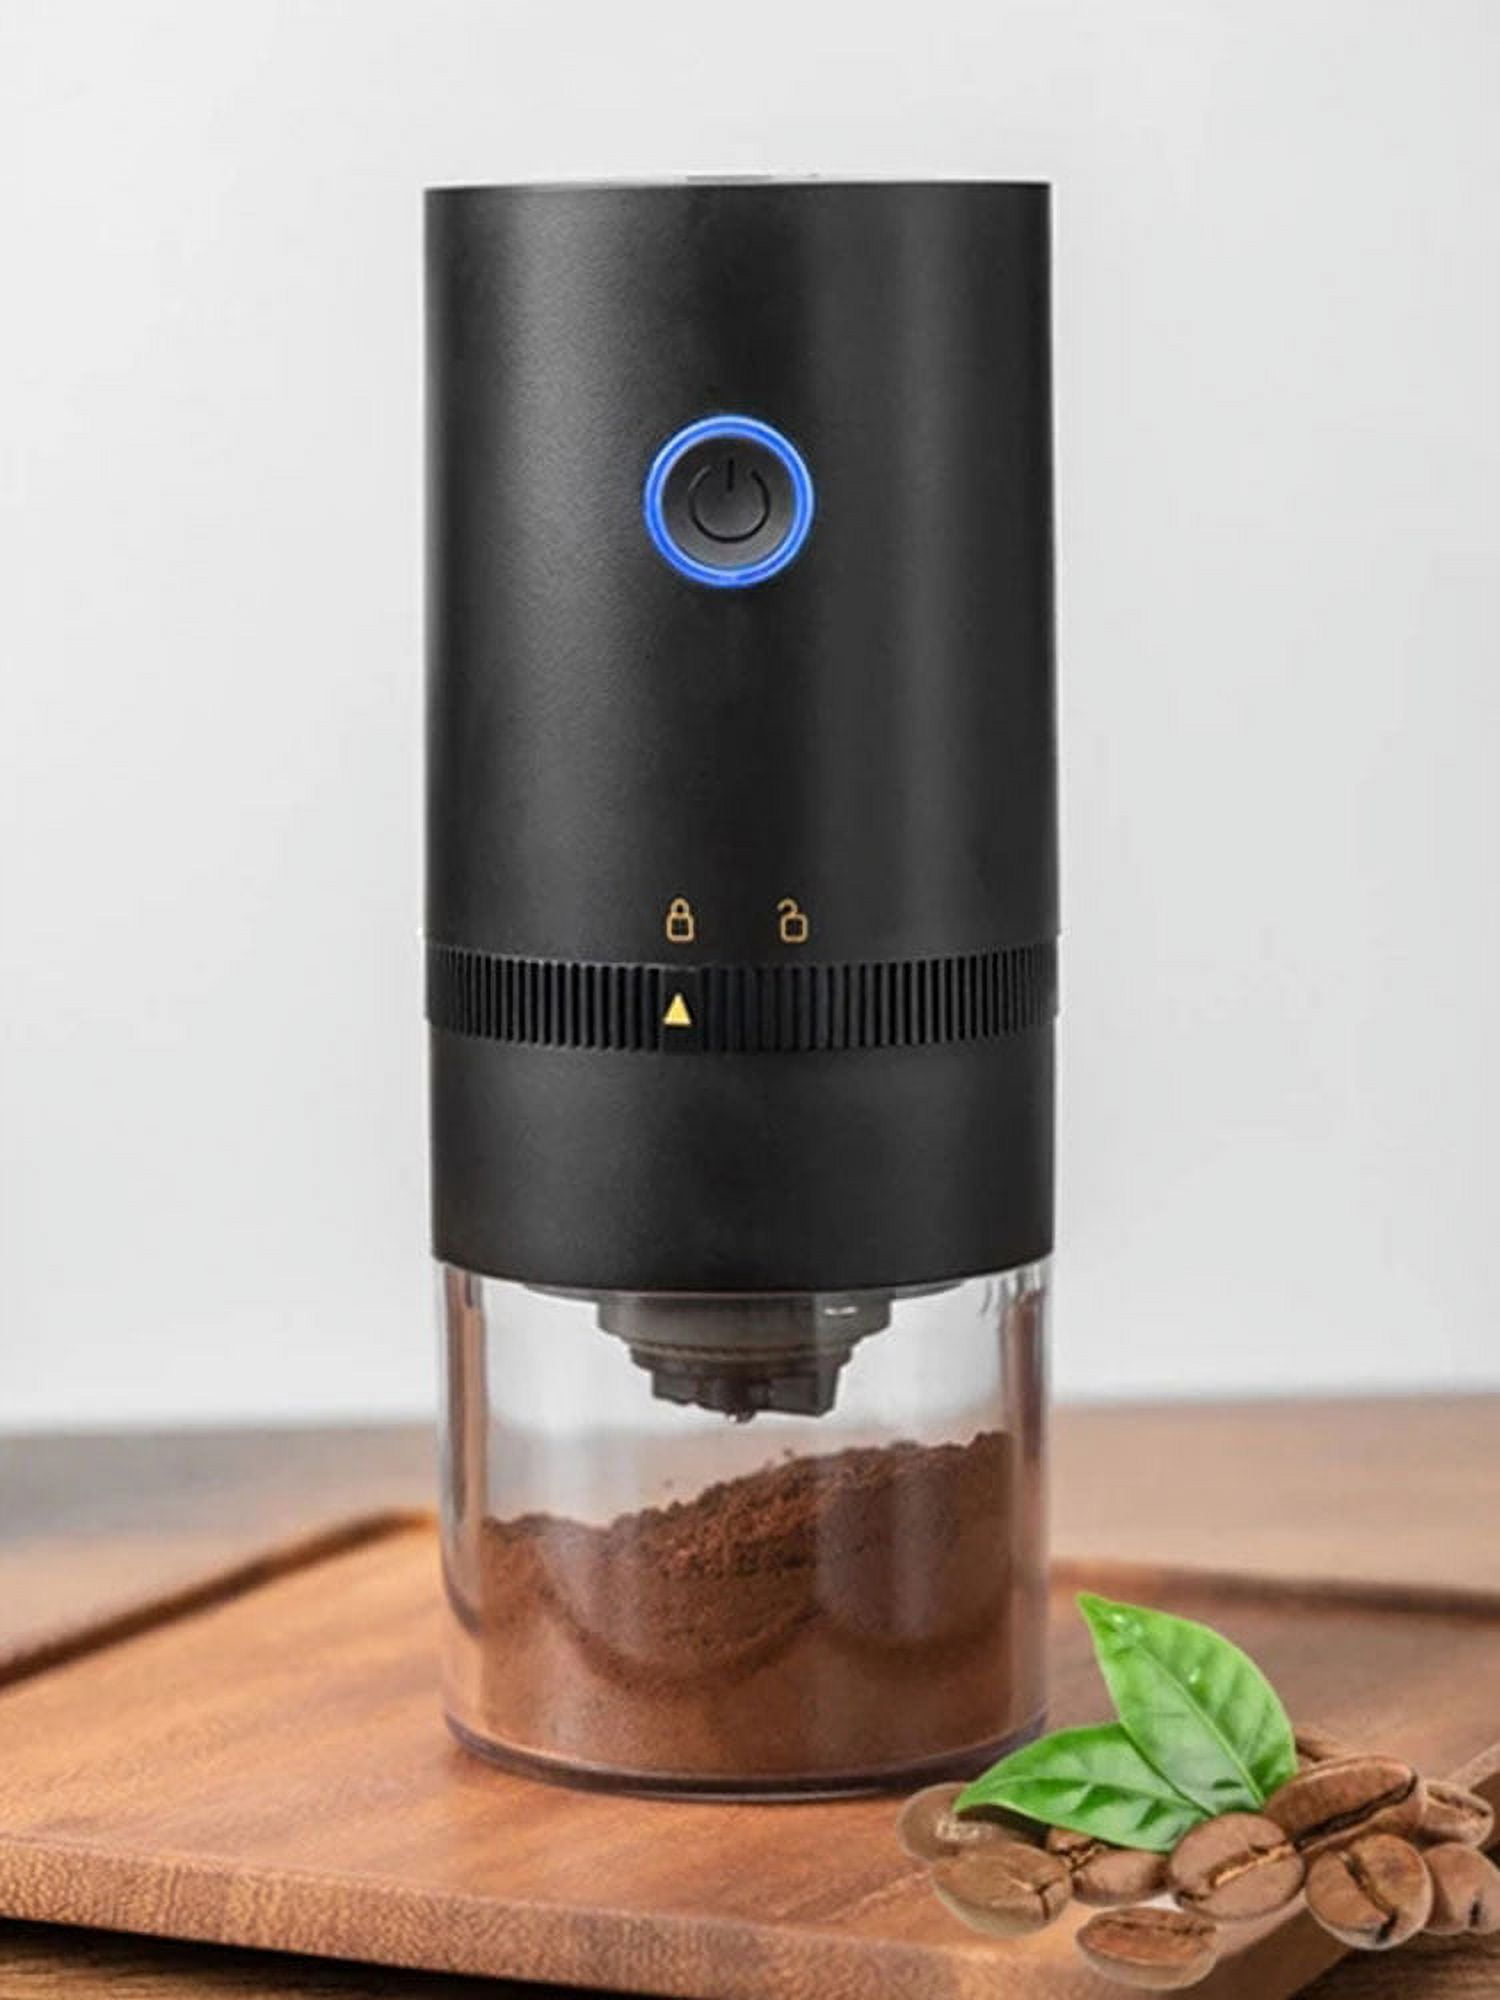 Adjustable Stainless Steel Coffee Beans Grinder — picogadget